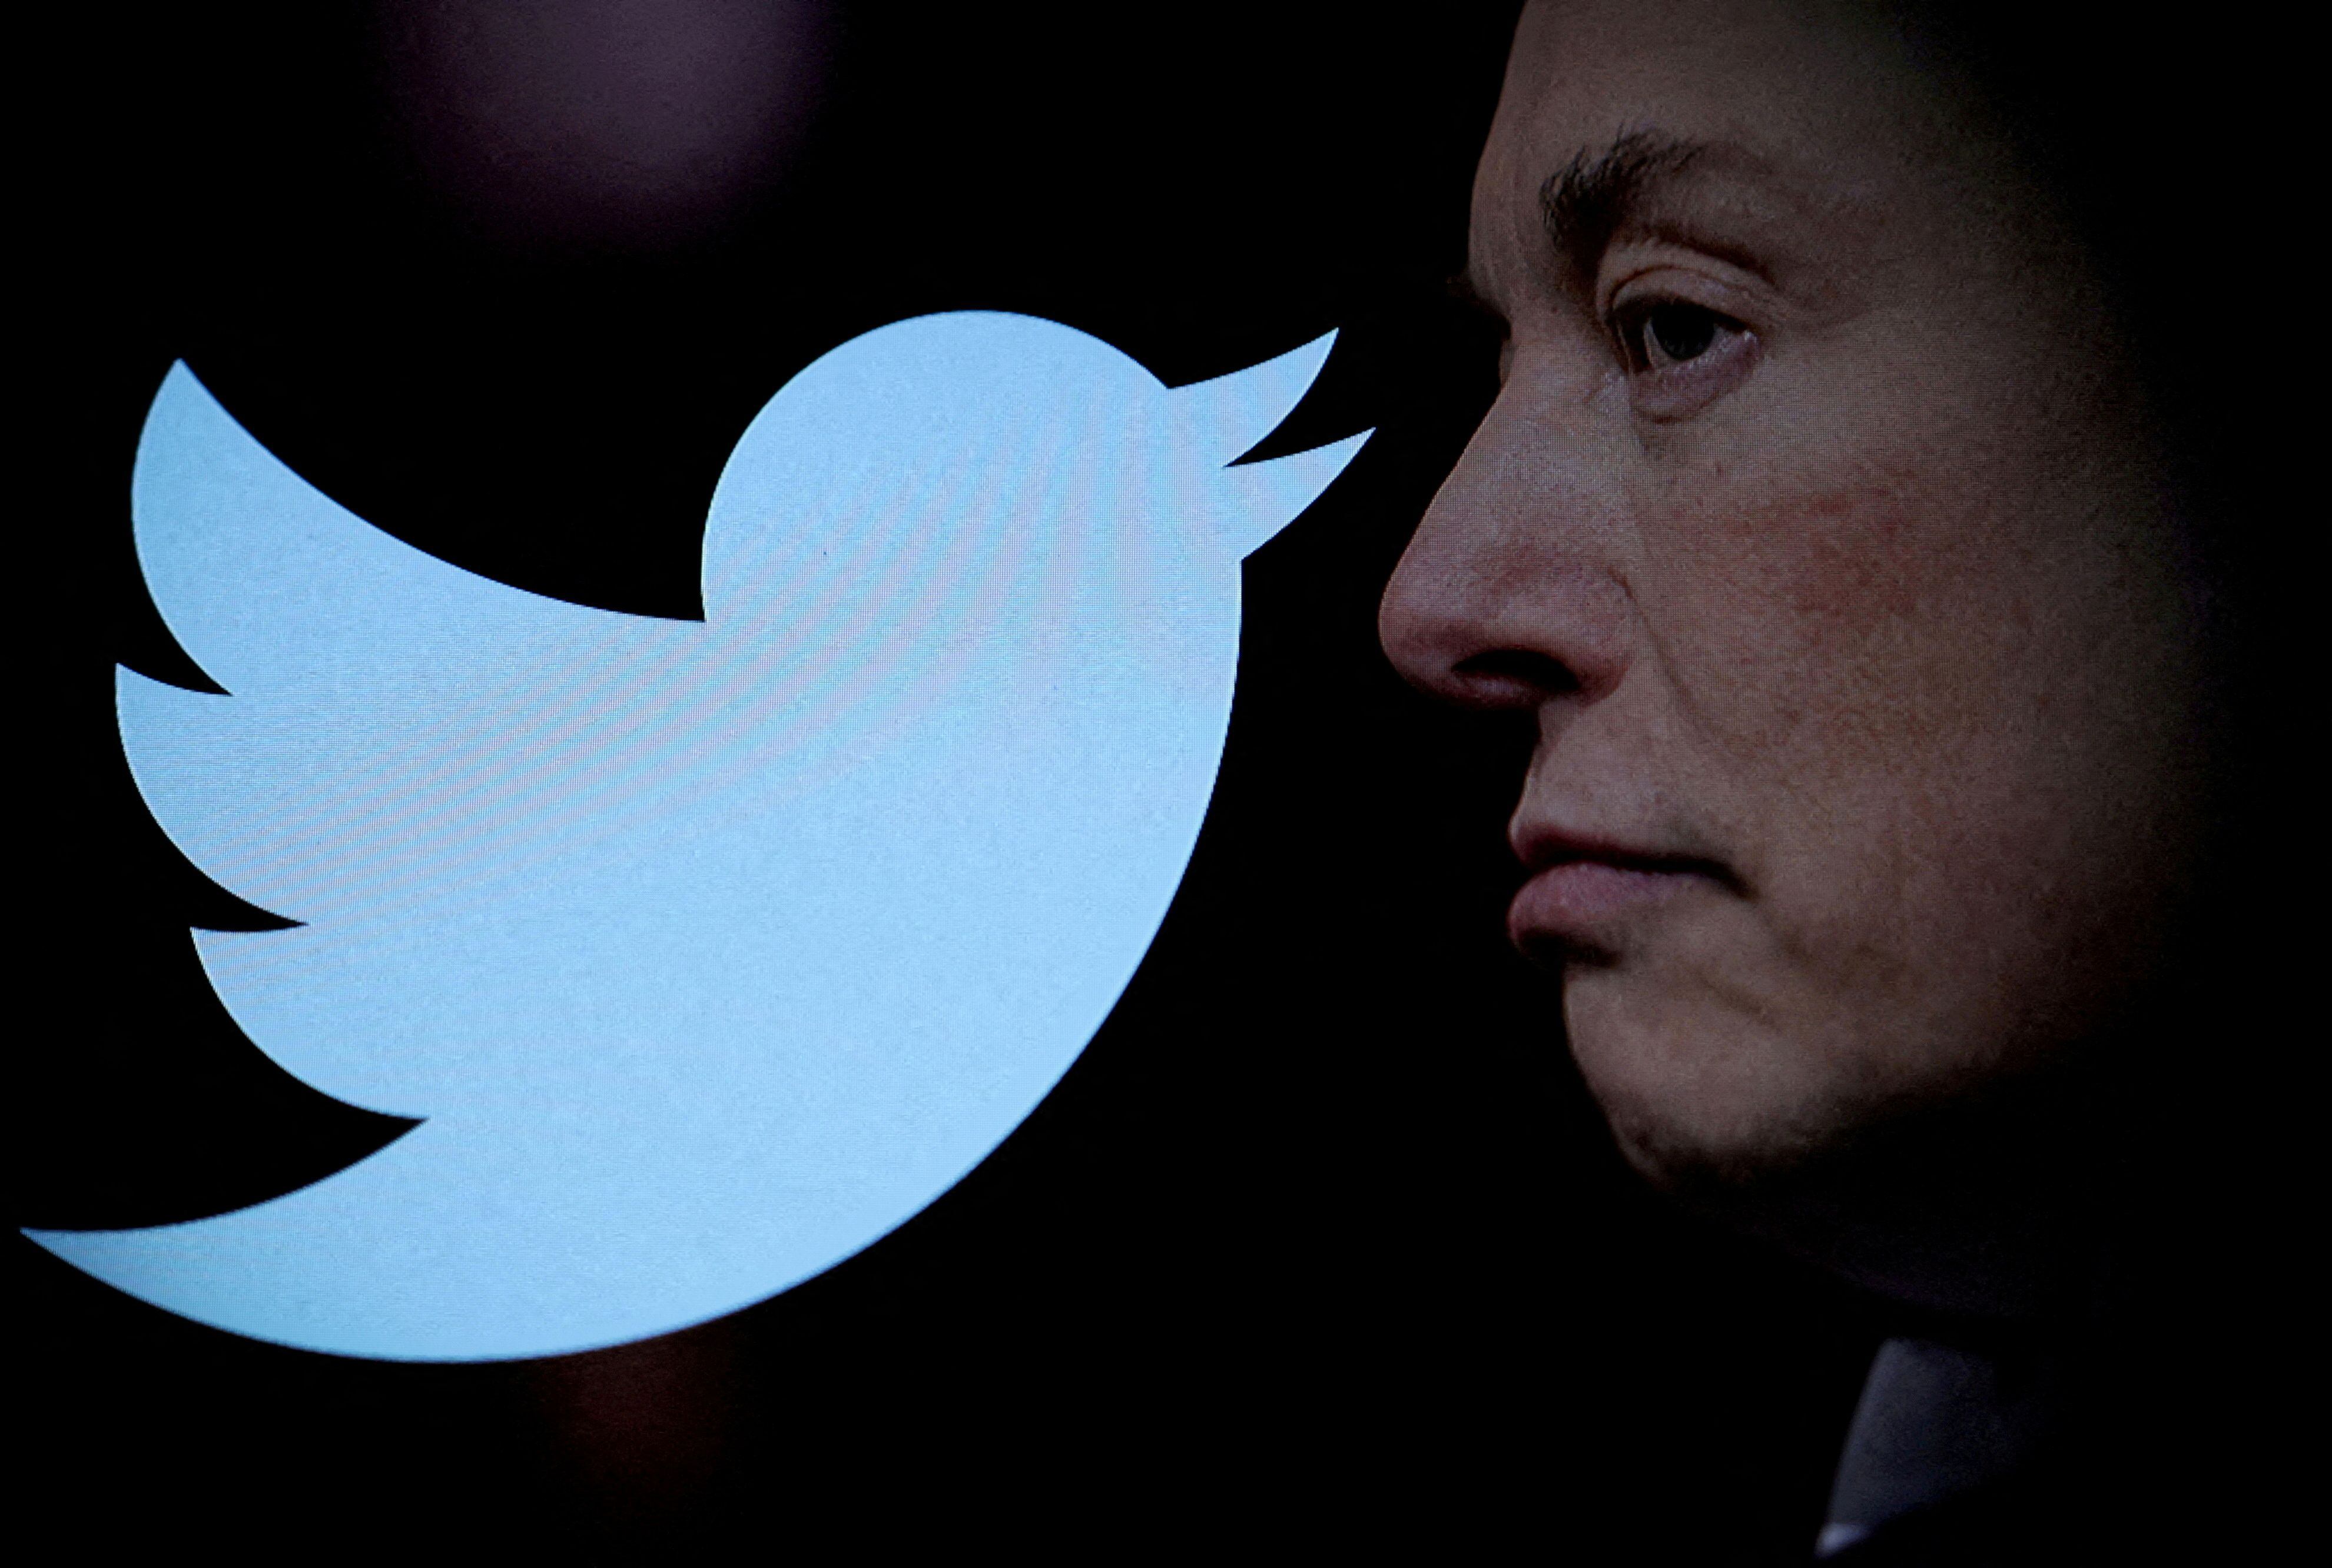 FILE PHOTO: Twitter logo and a photo of Elon Musk are displayed through magnifier in this illustration taken October 27, 2022. REUTERS/Dado Ruvic/Illustration/File Photo/File Photo